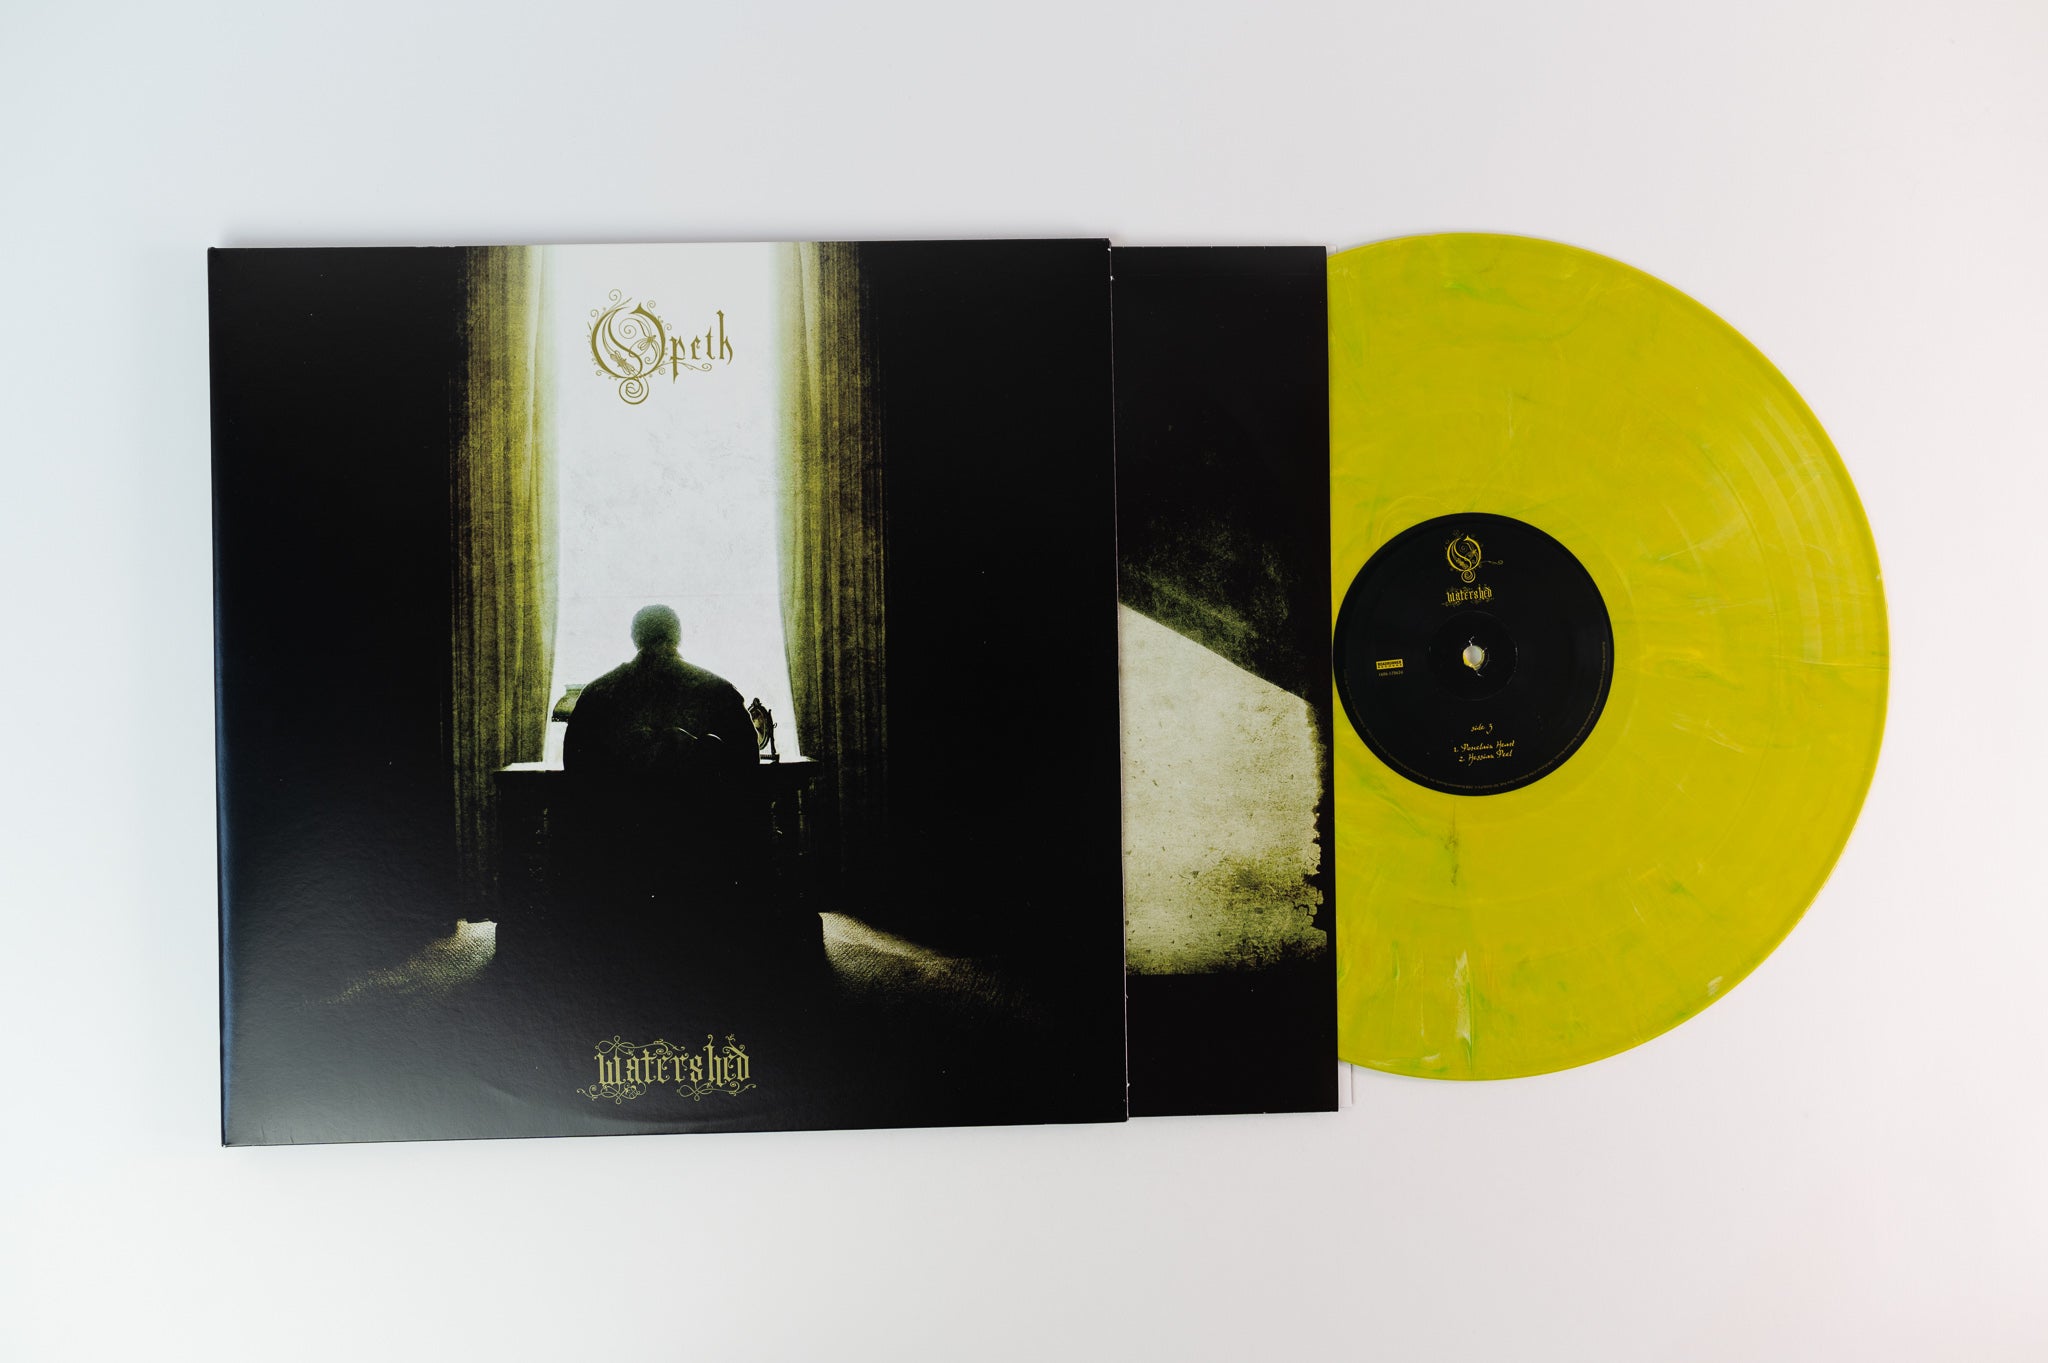 Opeth - Watershed on Roadrunner Limited Green Yellow Marbled Vinyl Reissue